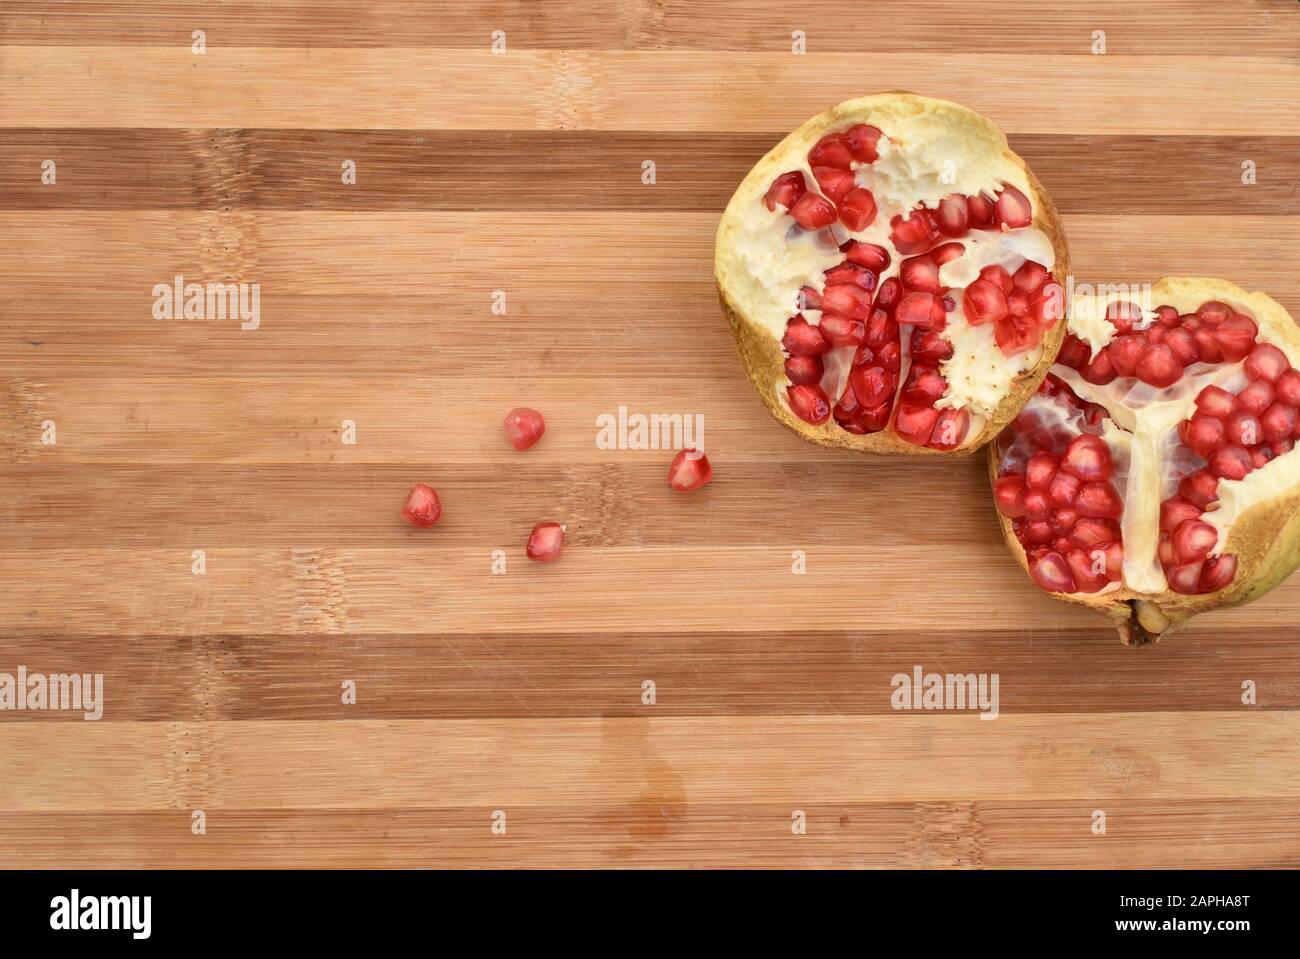 Wooden chopper board with fruits Stock Photo